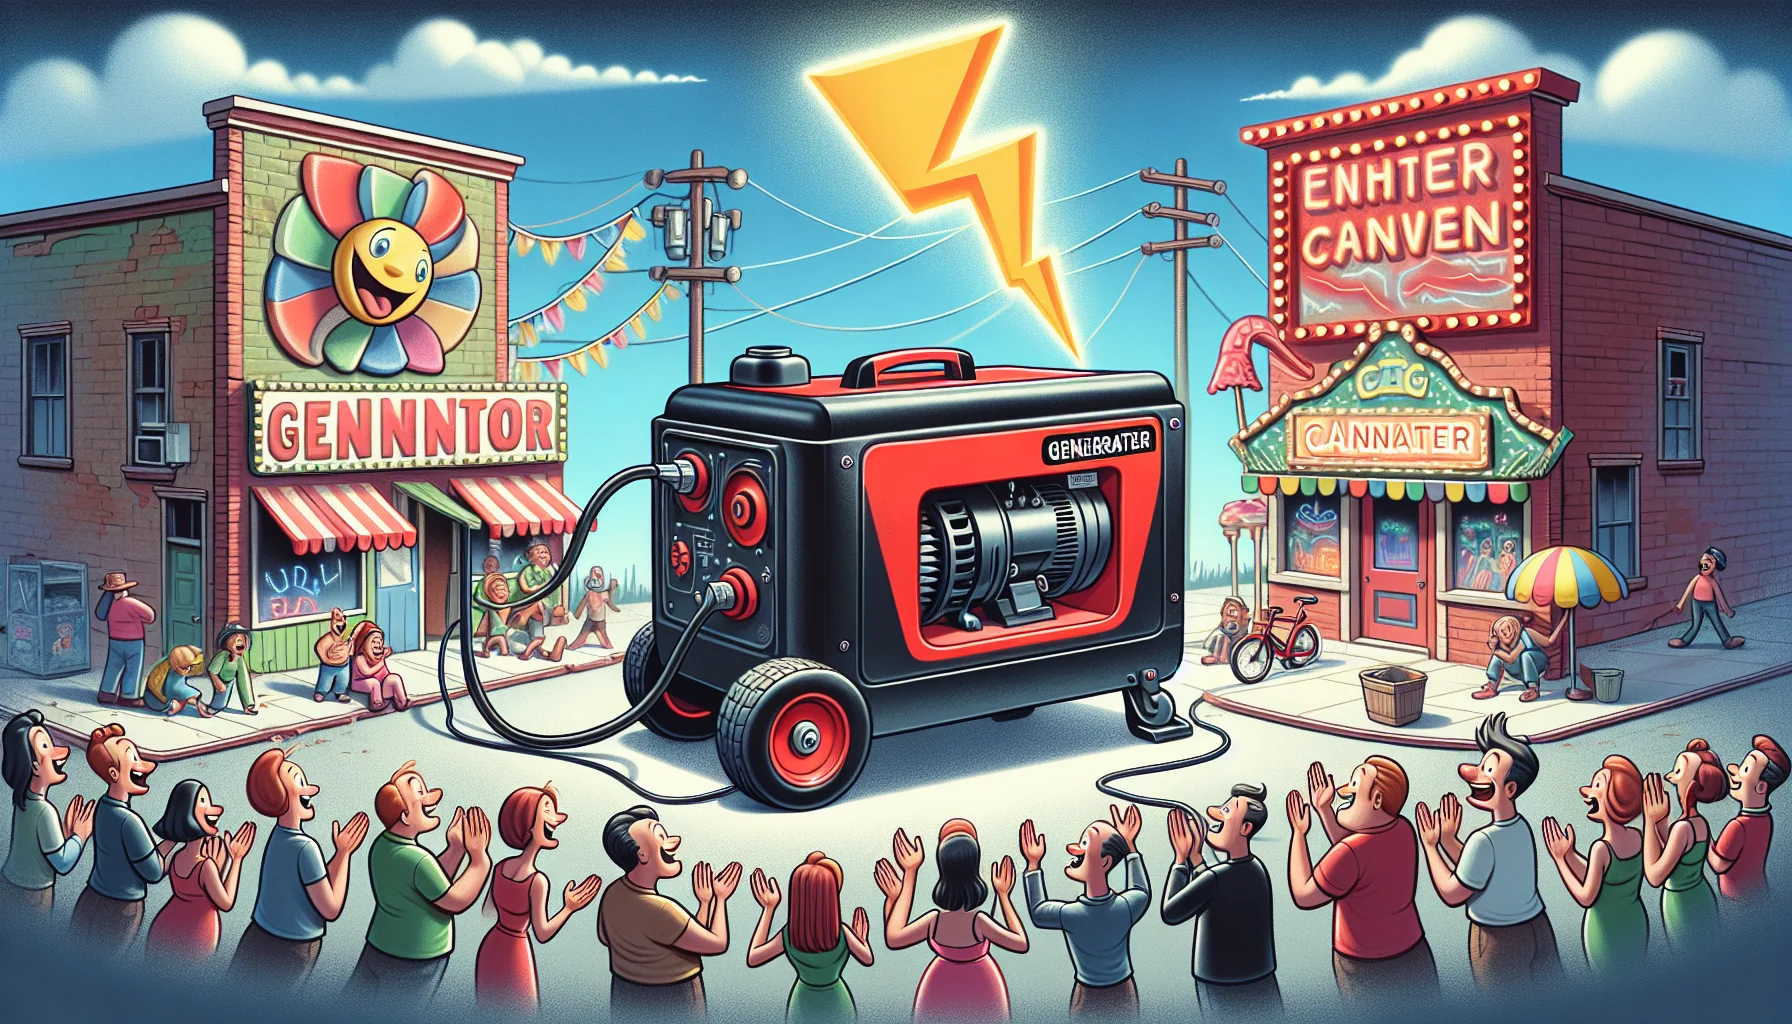 Imagine a humorous scene revolving around a large, robust, red and black portable power generator. This generator is playfully depicted as generating an extravagant lightning bolt to power a small town's carnival, illuminating neon signs and fun rides. A diverse collection of surprised yet delighted townspeople is seen applauding the generator. The generator is characterized with cartoon-like facial features, giving it a friendly and helpful, almost heroic personality.